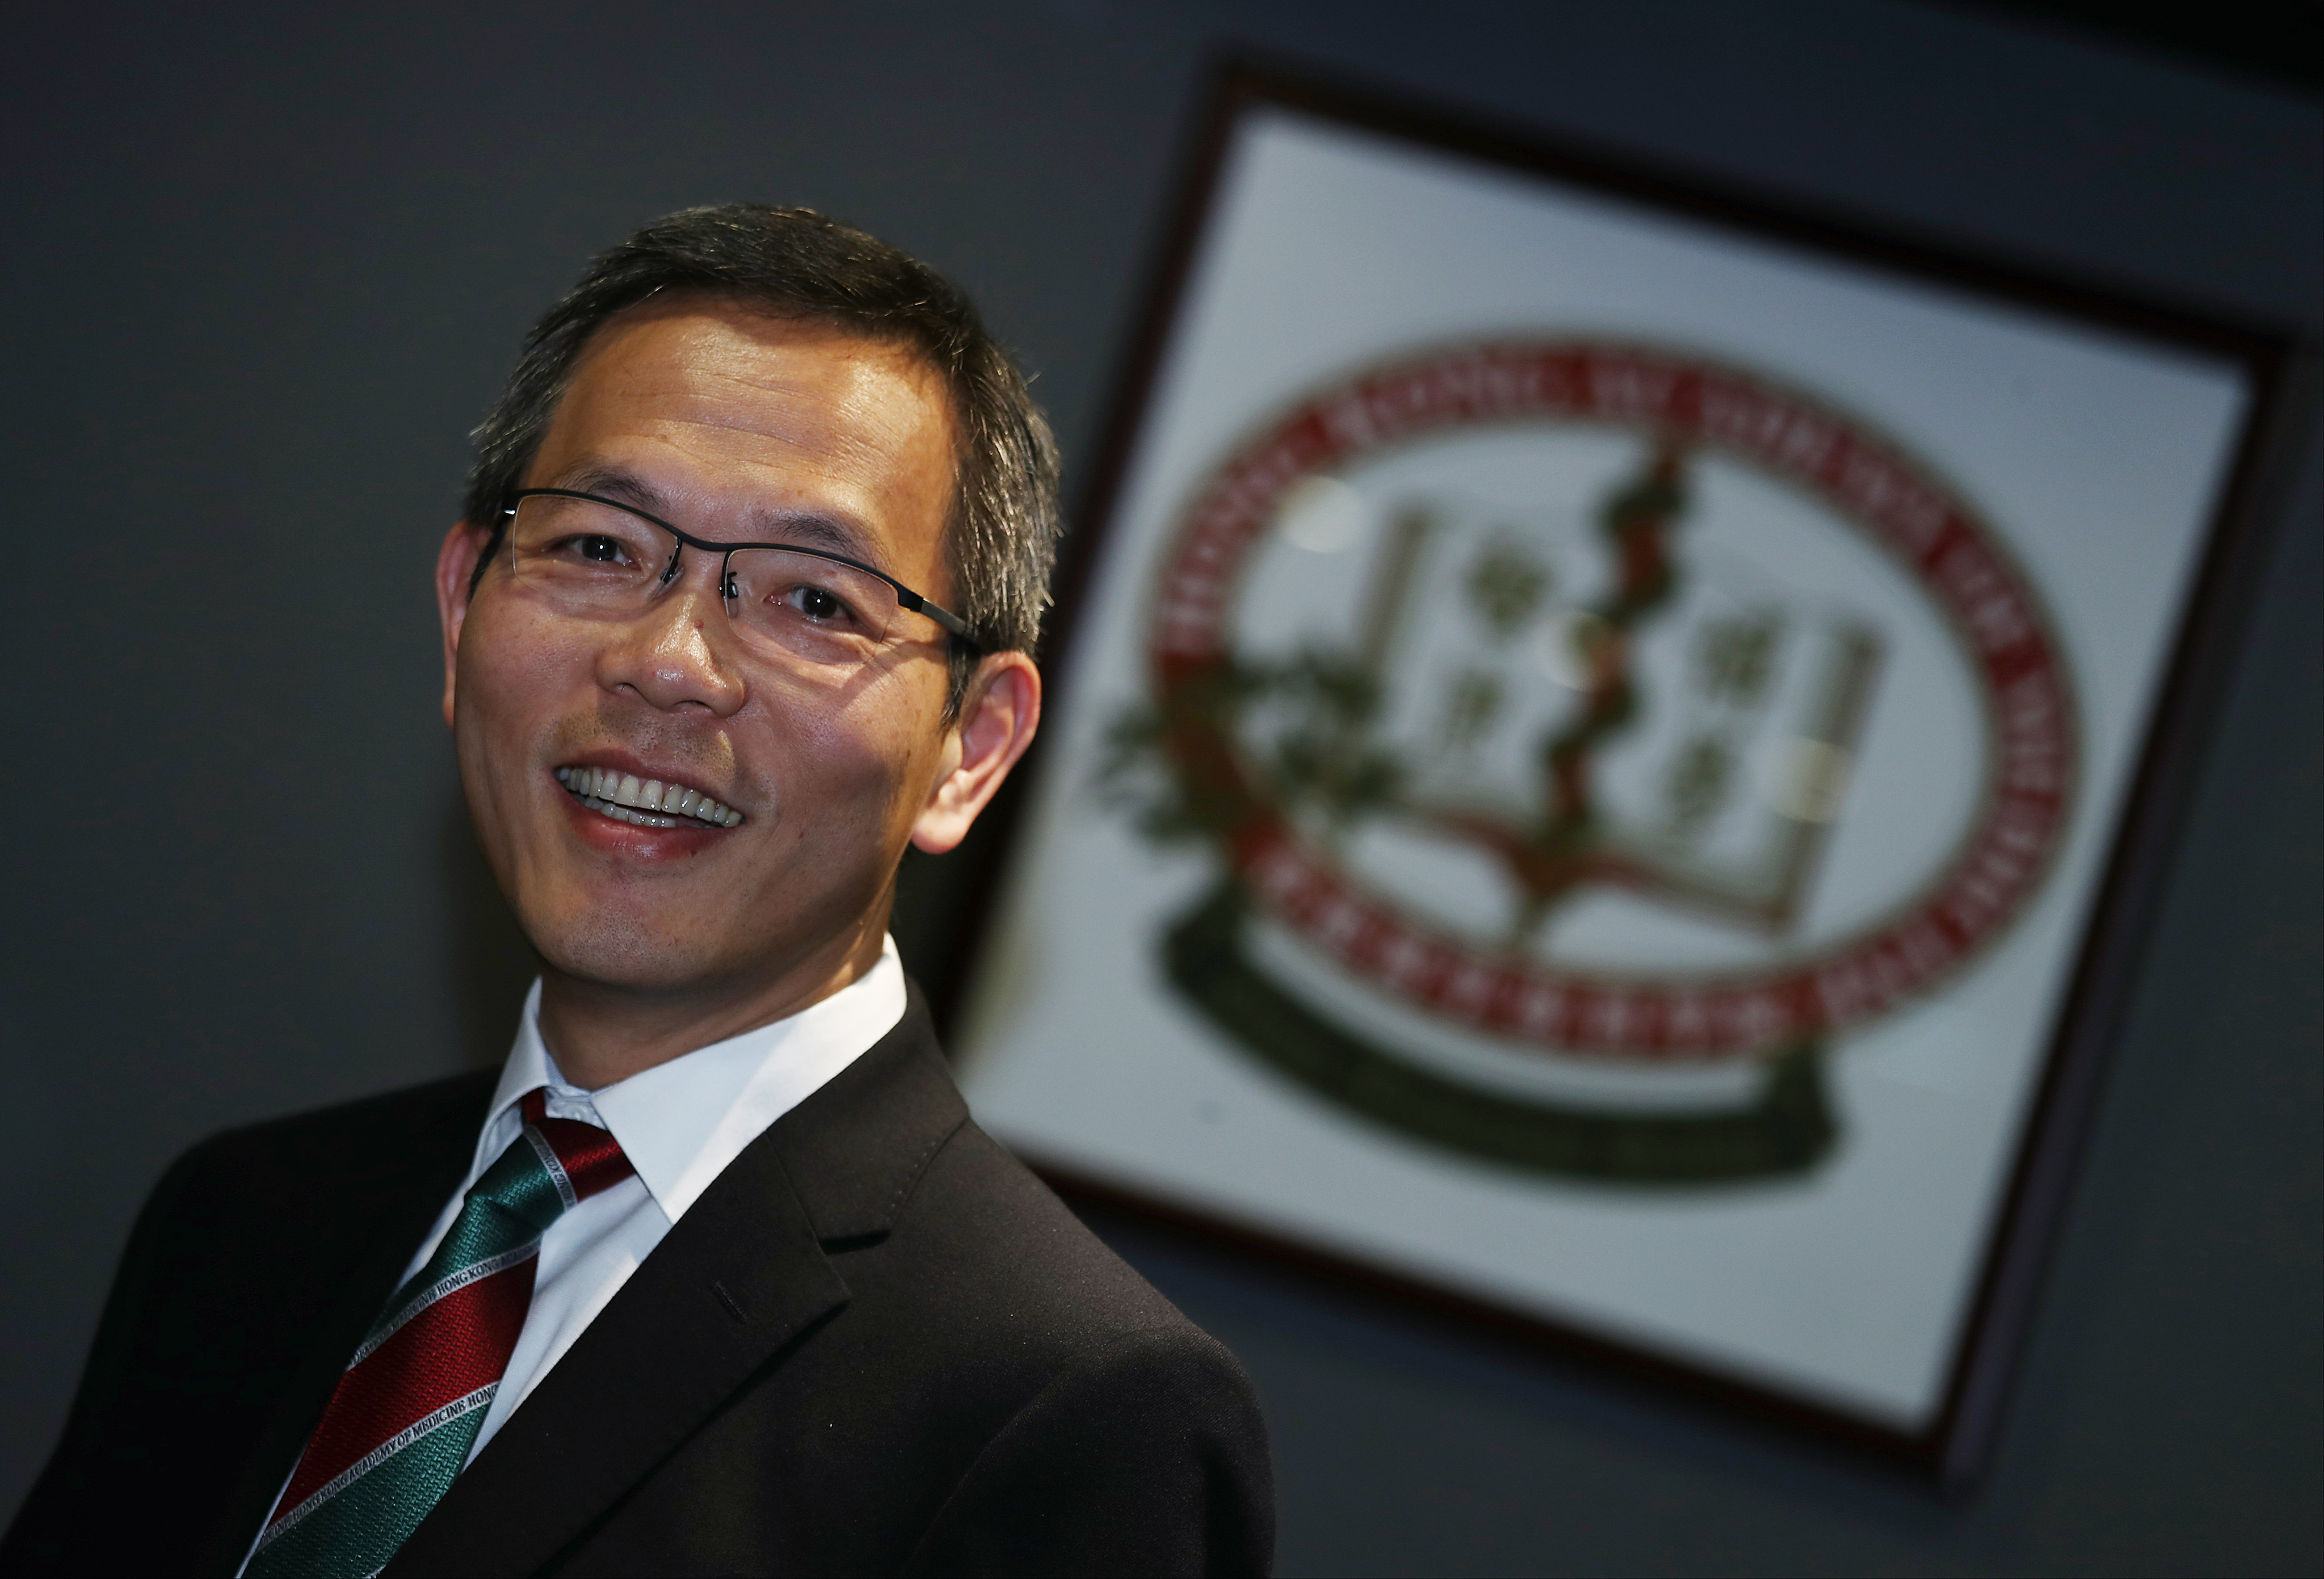 Wallace Lau has served as the interim dean of the medical school for more than a year. Photo: Nora Tam